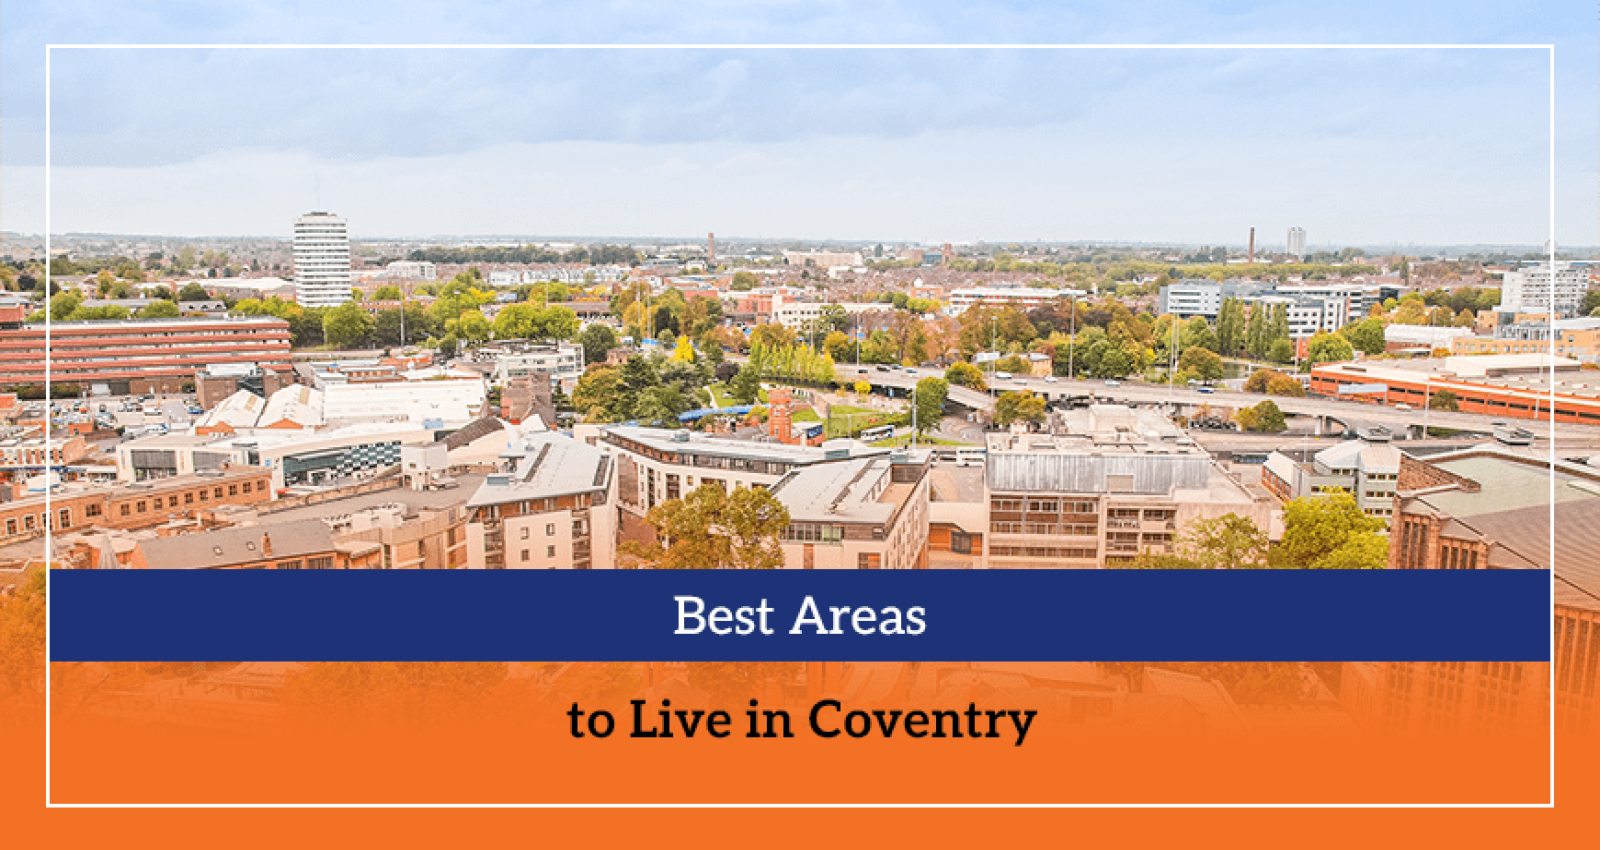 Best Areas to Live in Coventry